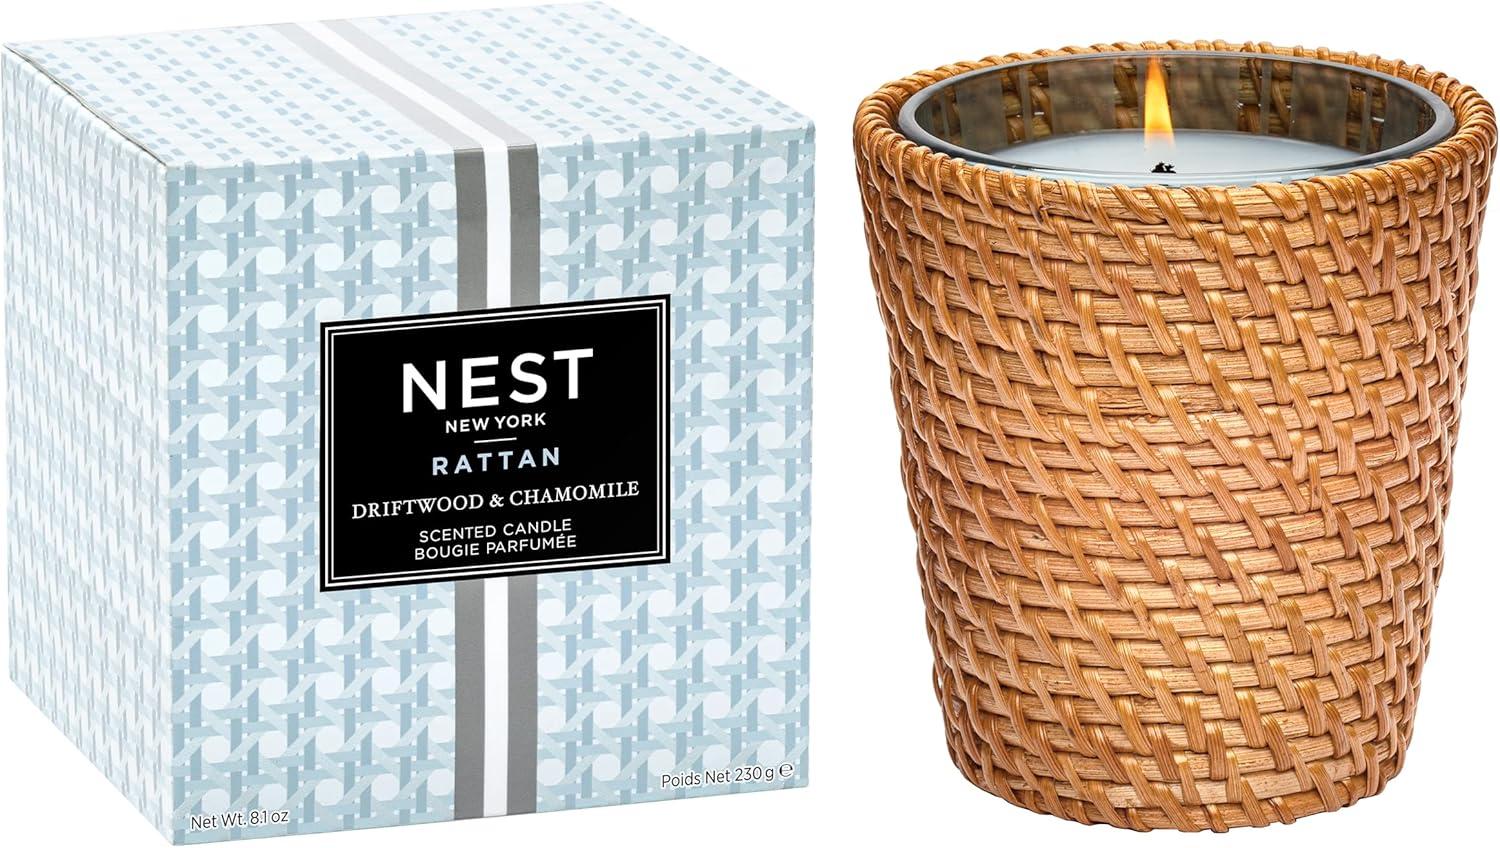 Driftwood & Chamomile Scented Soy Candle with Rattan Sleeve, 8 Oz